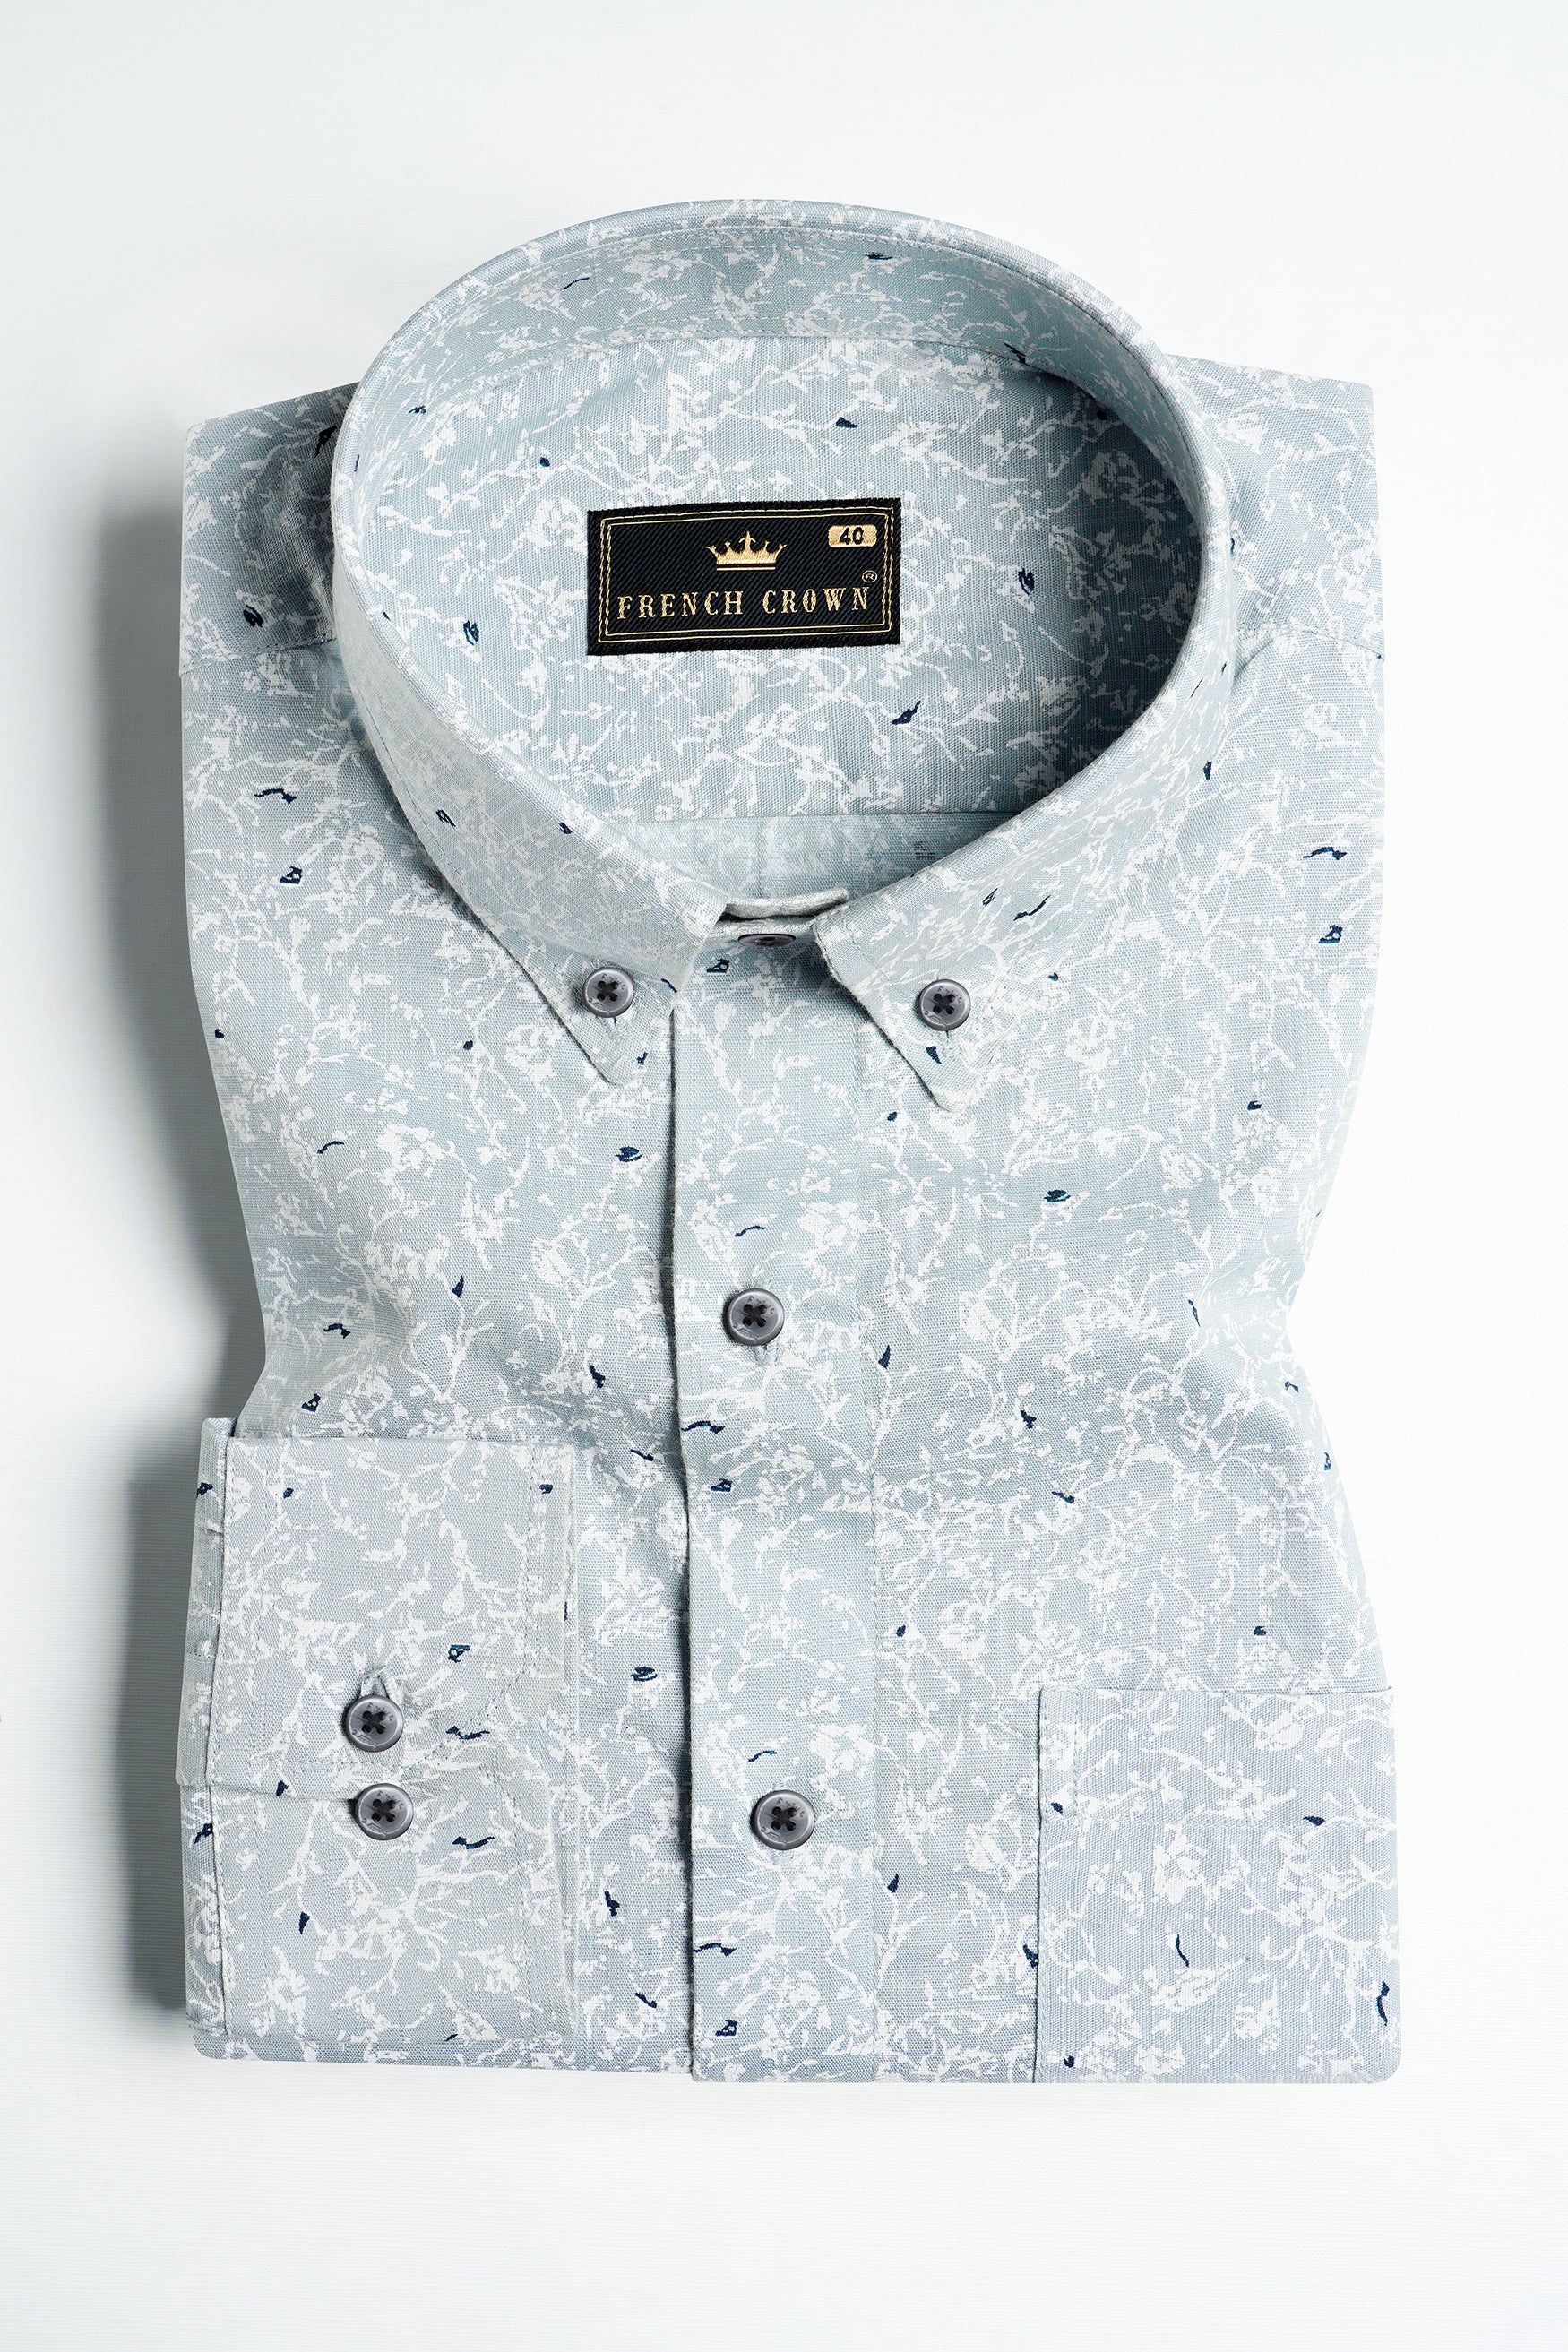 Bright White and Geyser Gray Printed Luxurious Linen Shirt